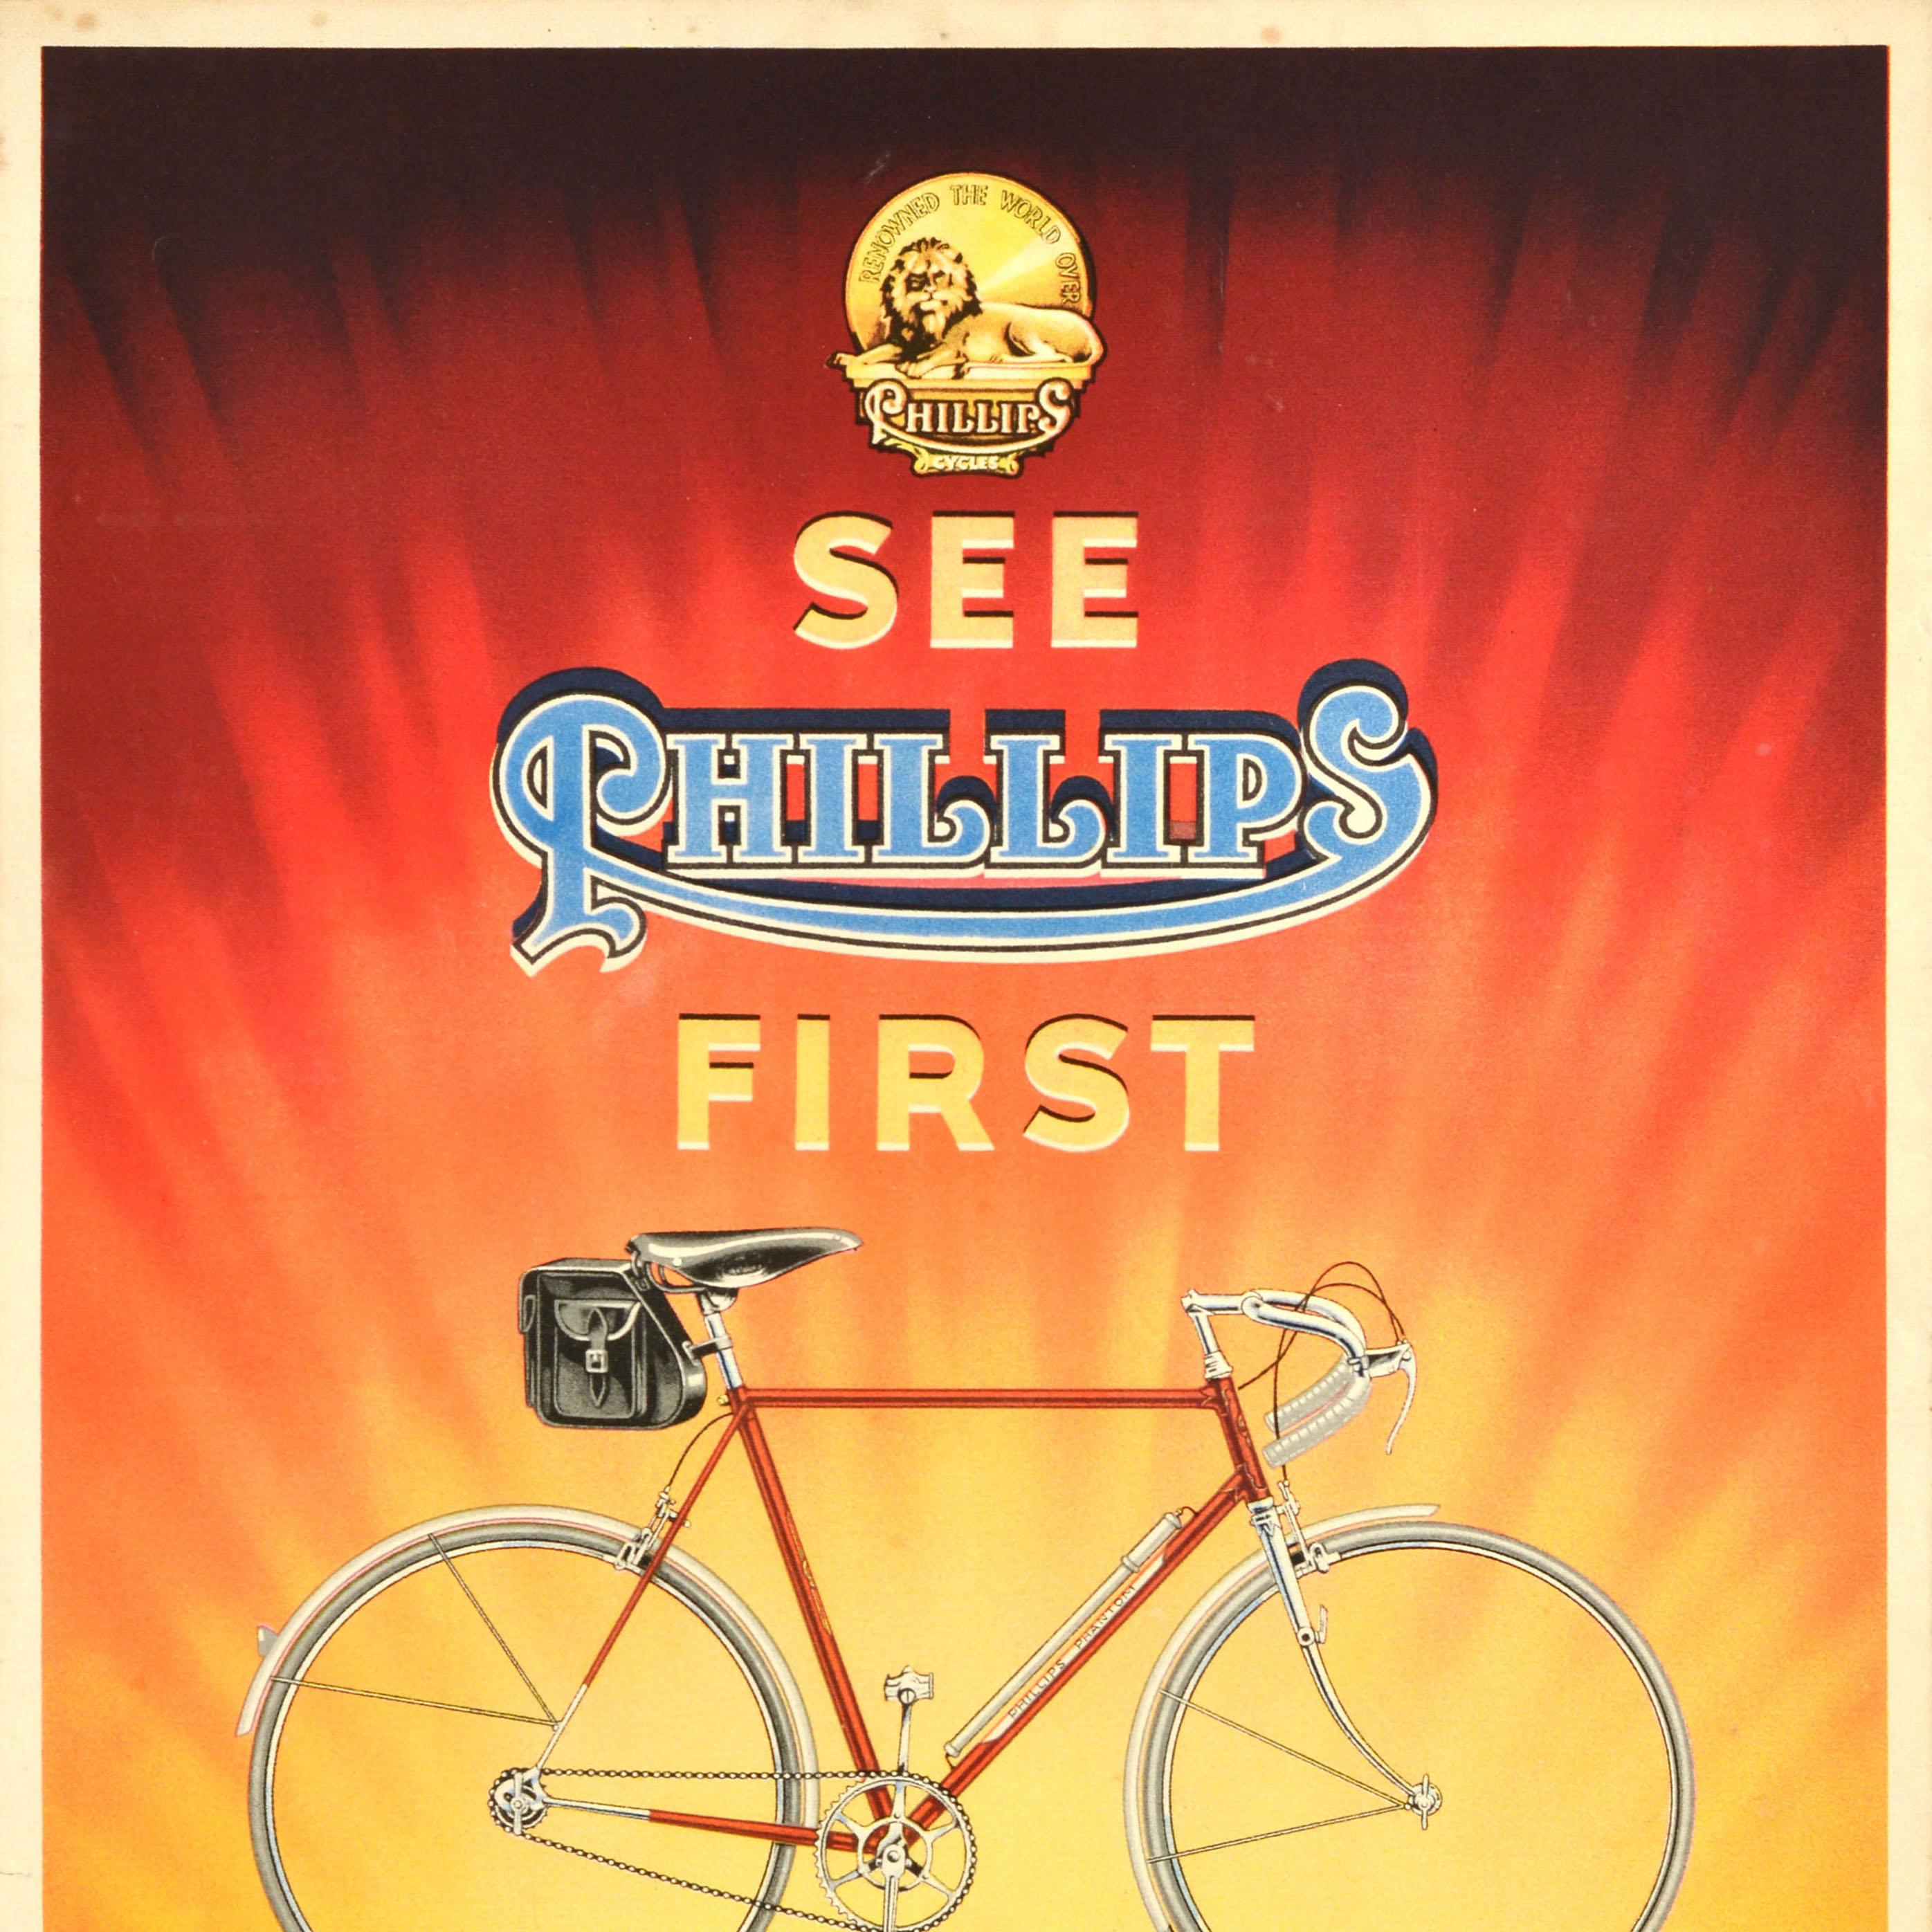 Original vintage bicycle advertising poster - See Phillips first A wonderful range of sports machines ask here for free illustrated catalogue - featuring an image of a new sport bike lit up by the sun shining in yellow, orange and red in the